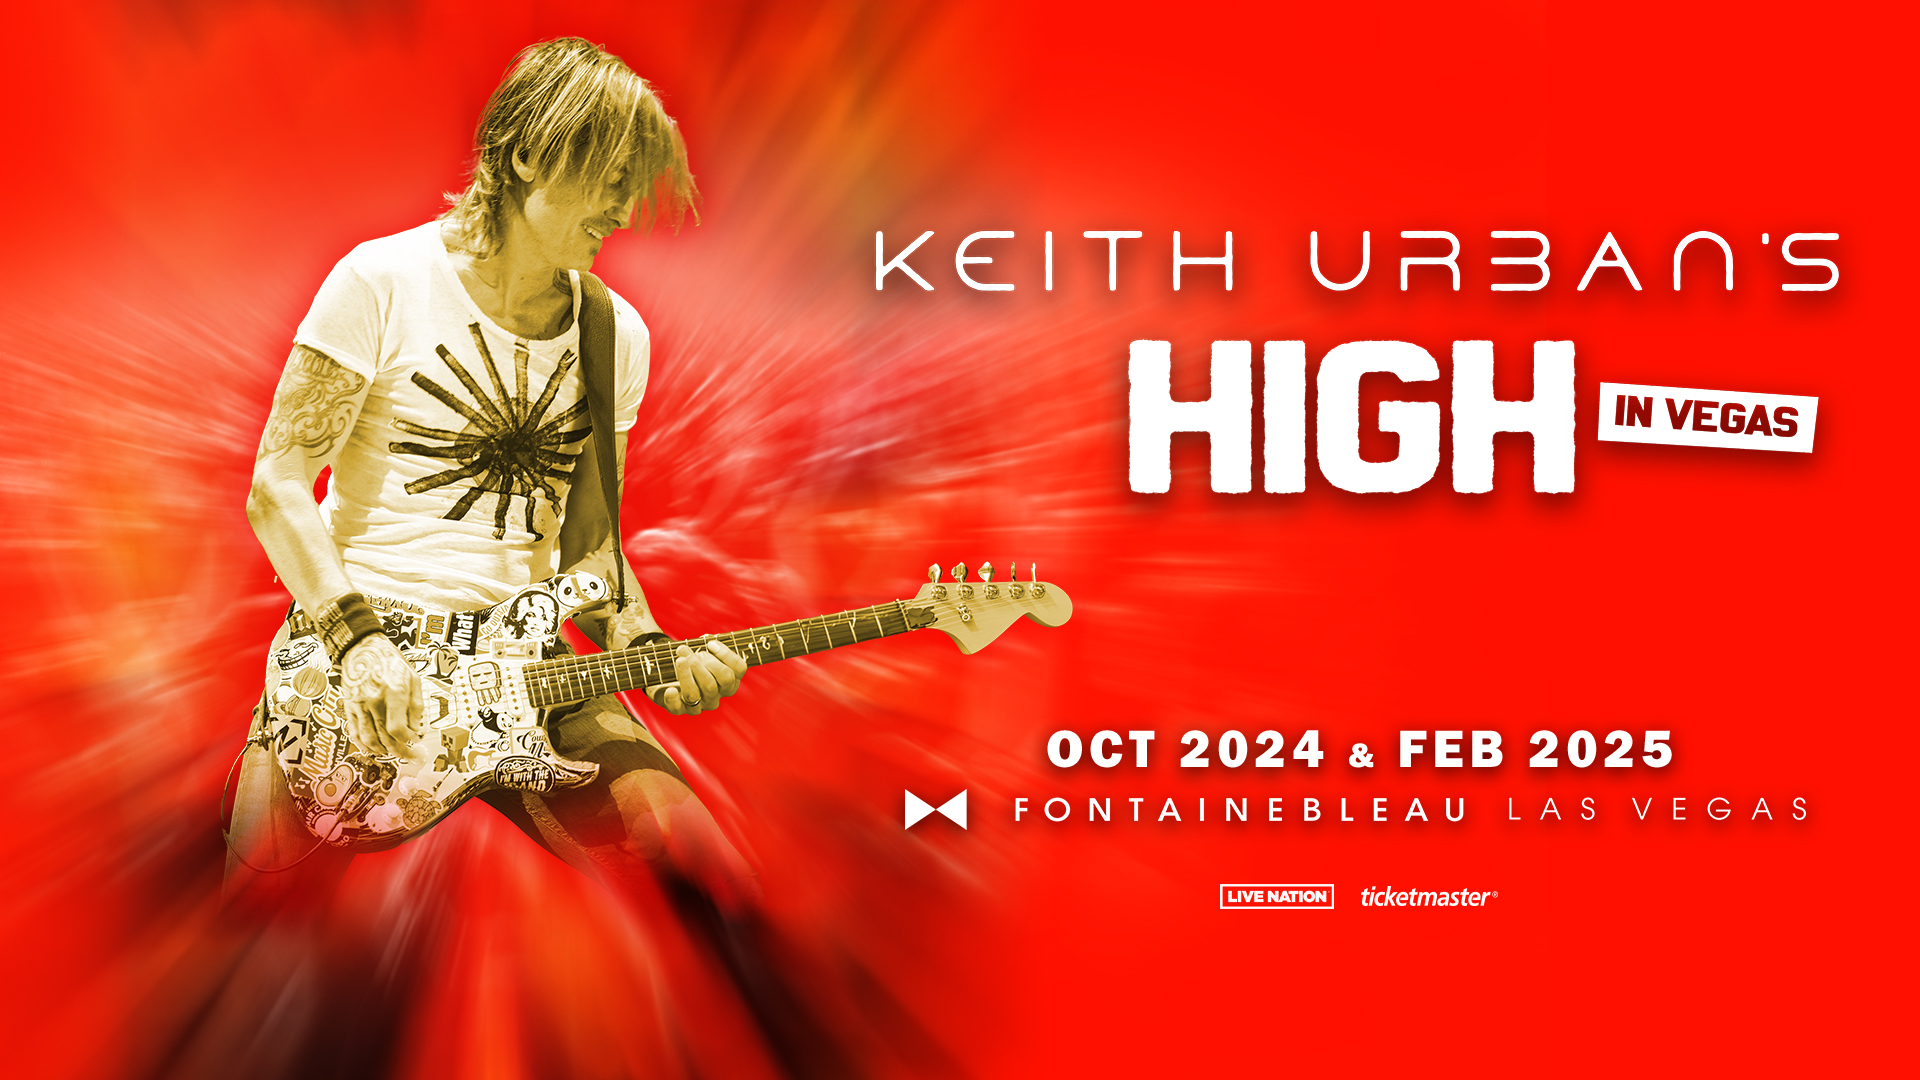 Keith Urban's High in Vegas - October 2024 and February 2025